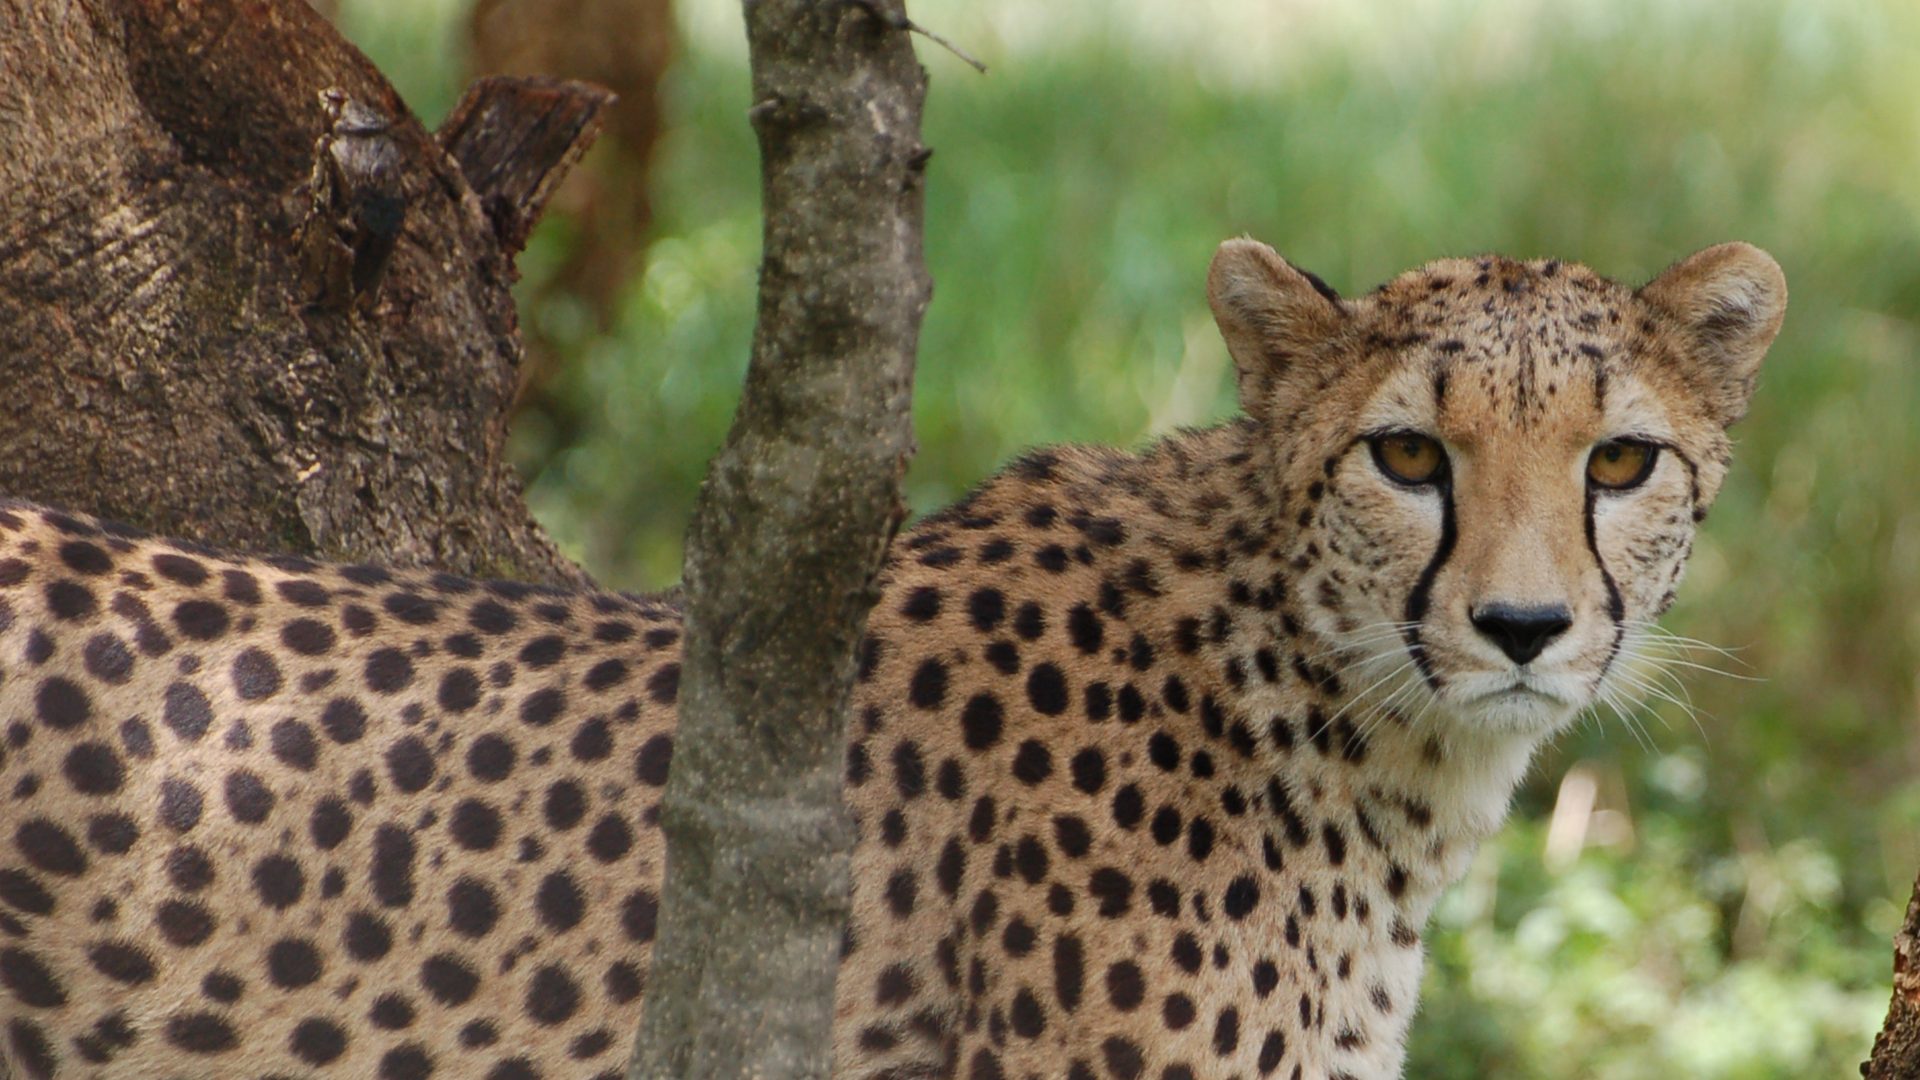 An adult cheetah peering at the camera through the undergrowth.